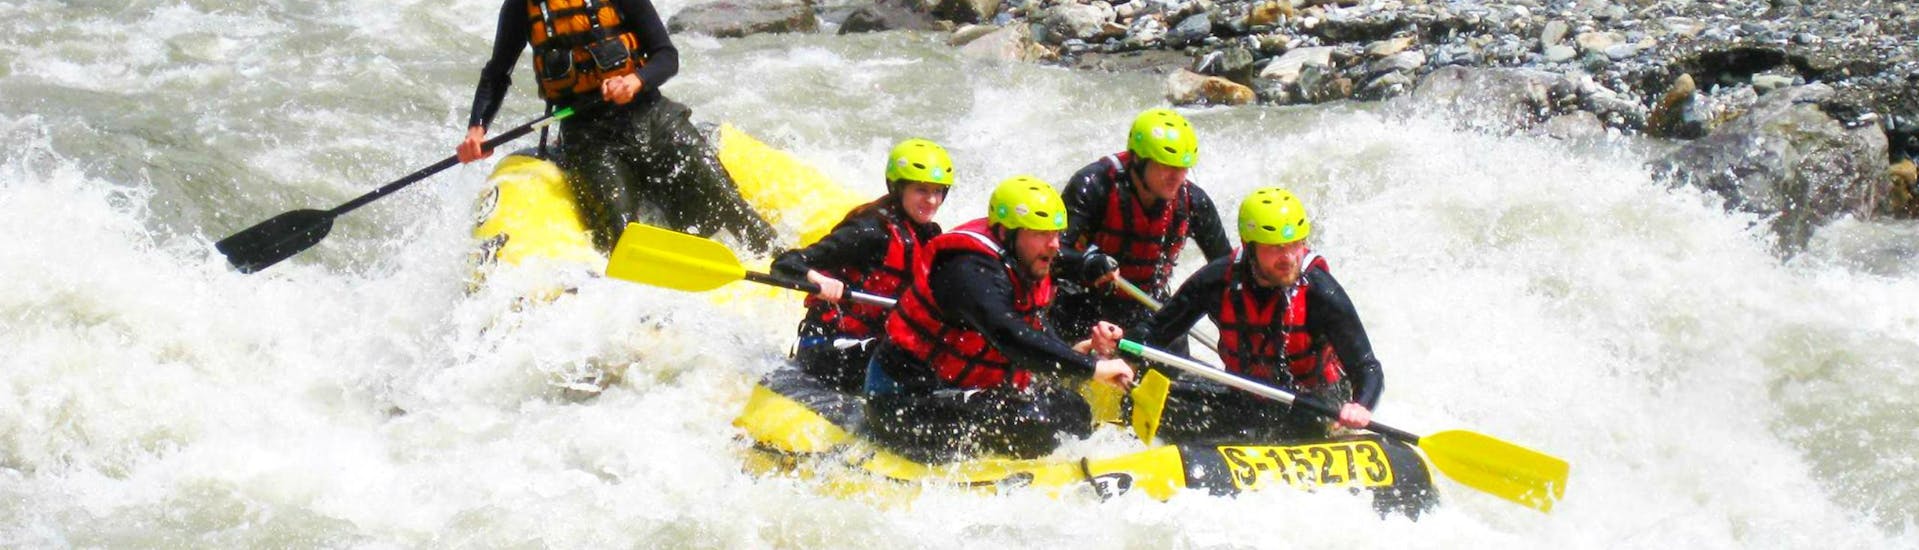 white-water-rafting-on-the-salzach-river-frost-hero